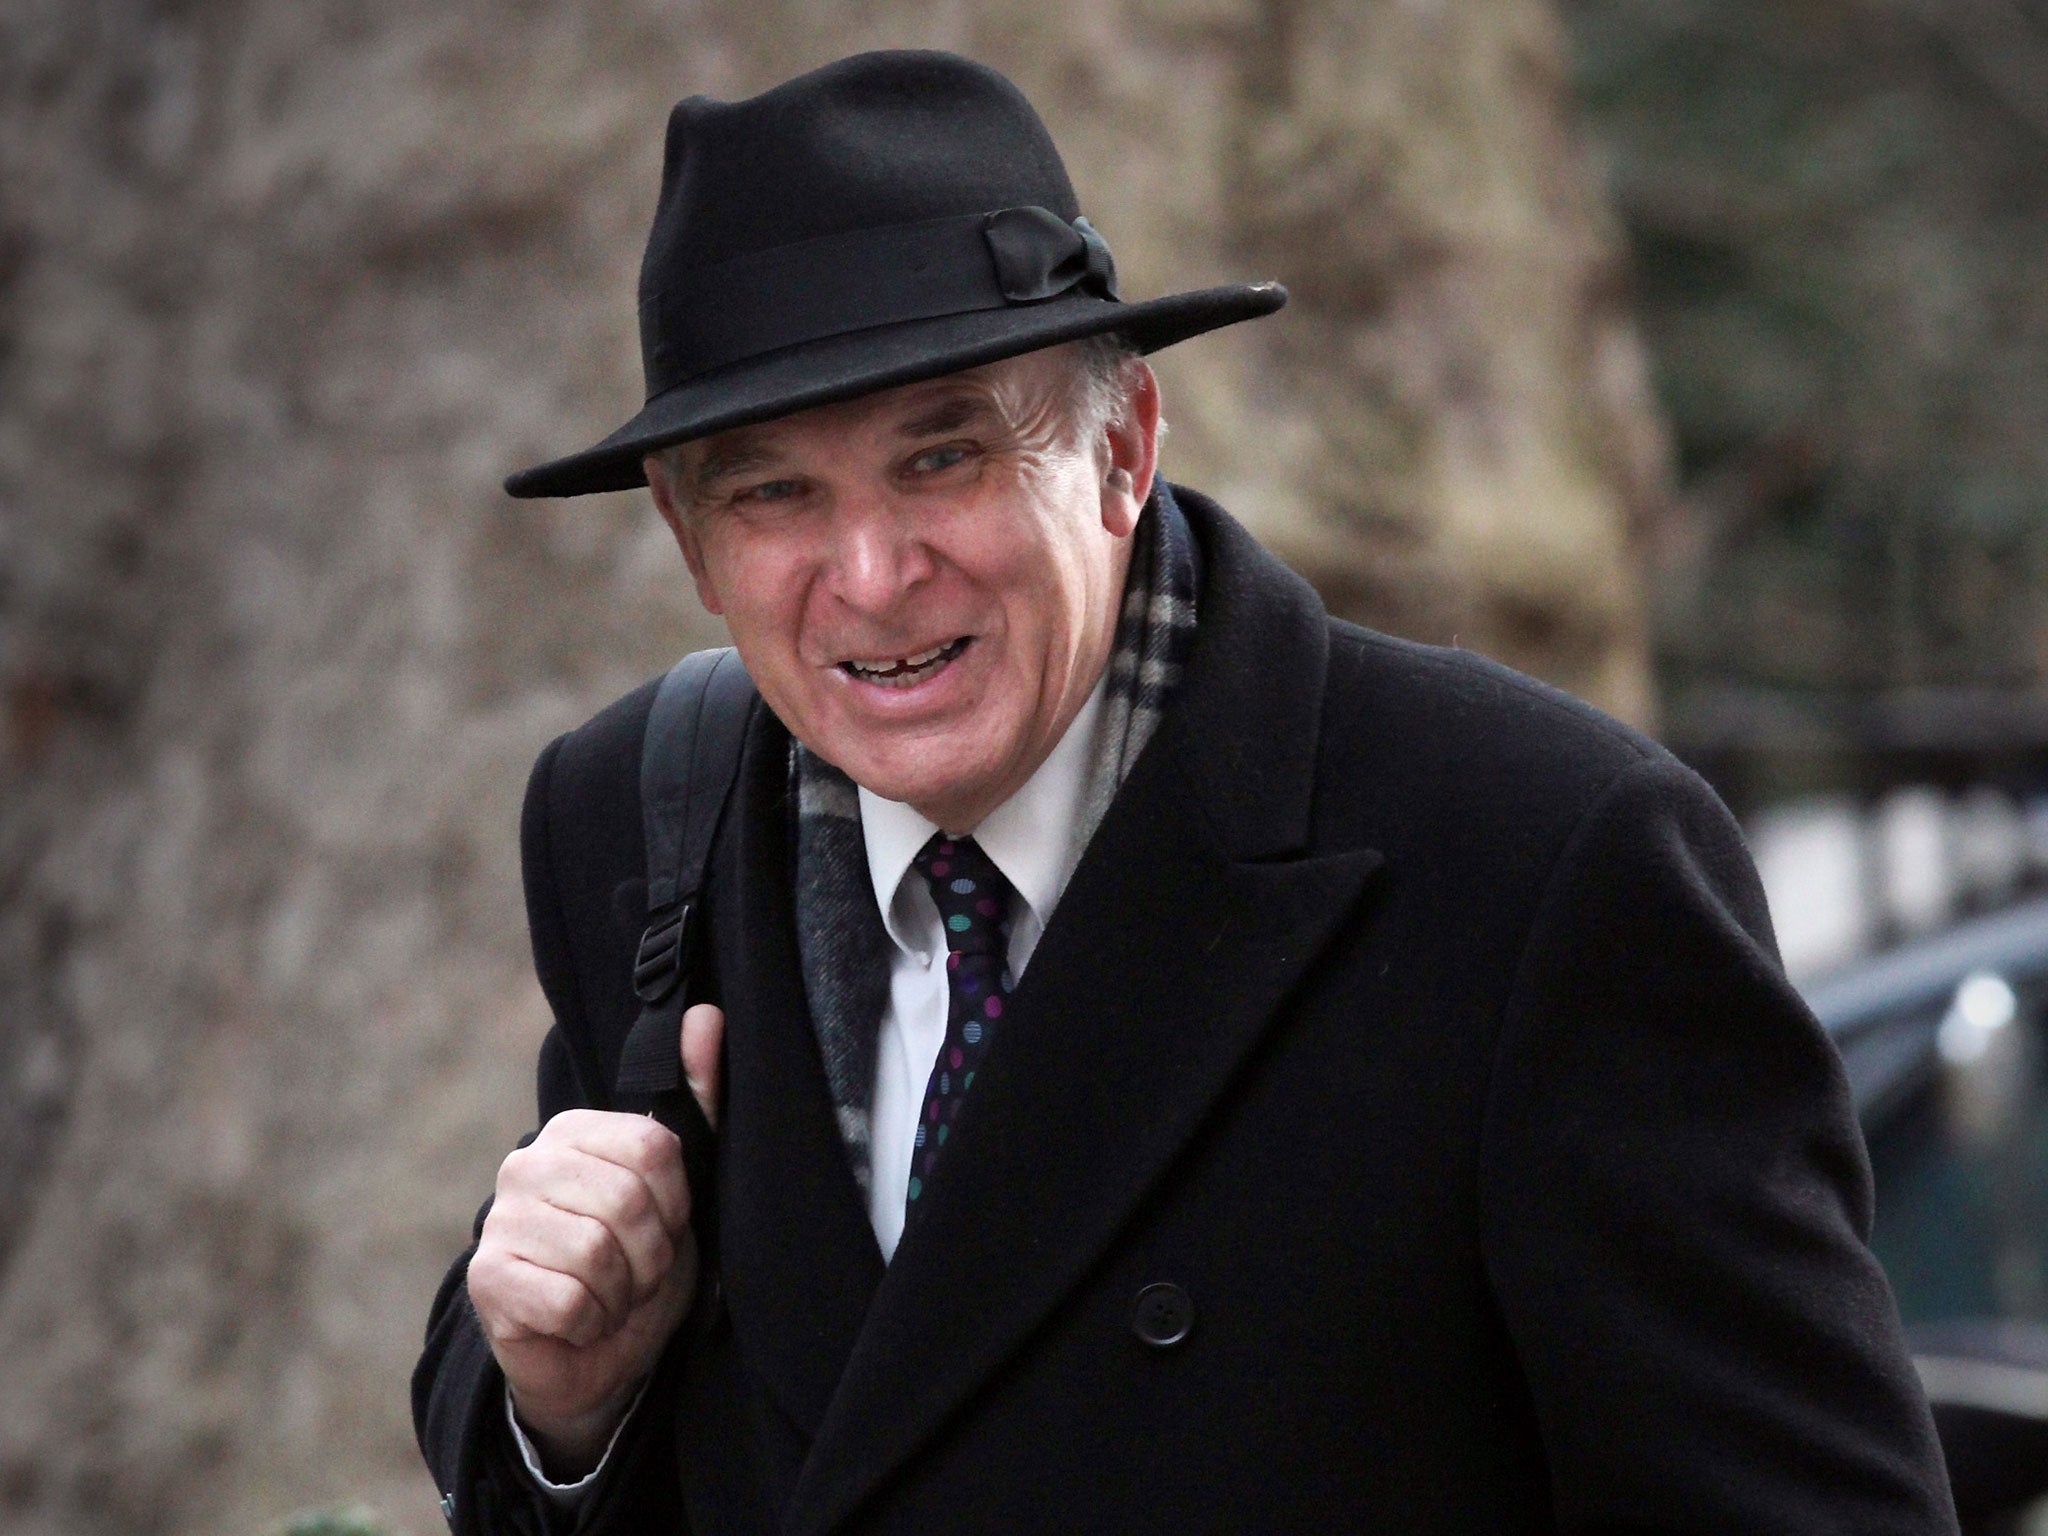 Vince Cable has confirmed he will re-contest his old seat of Twickenham, which voted overwhelmingly to remain in the EU